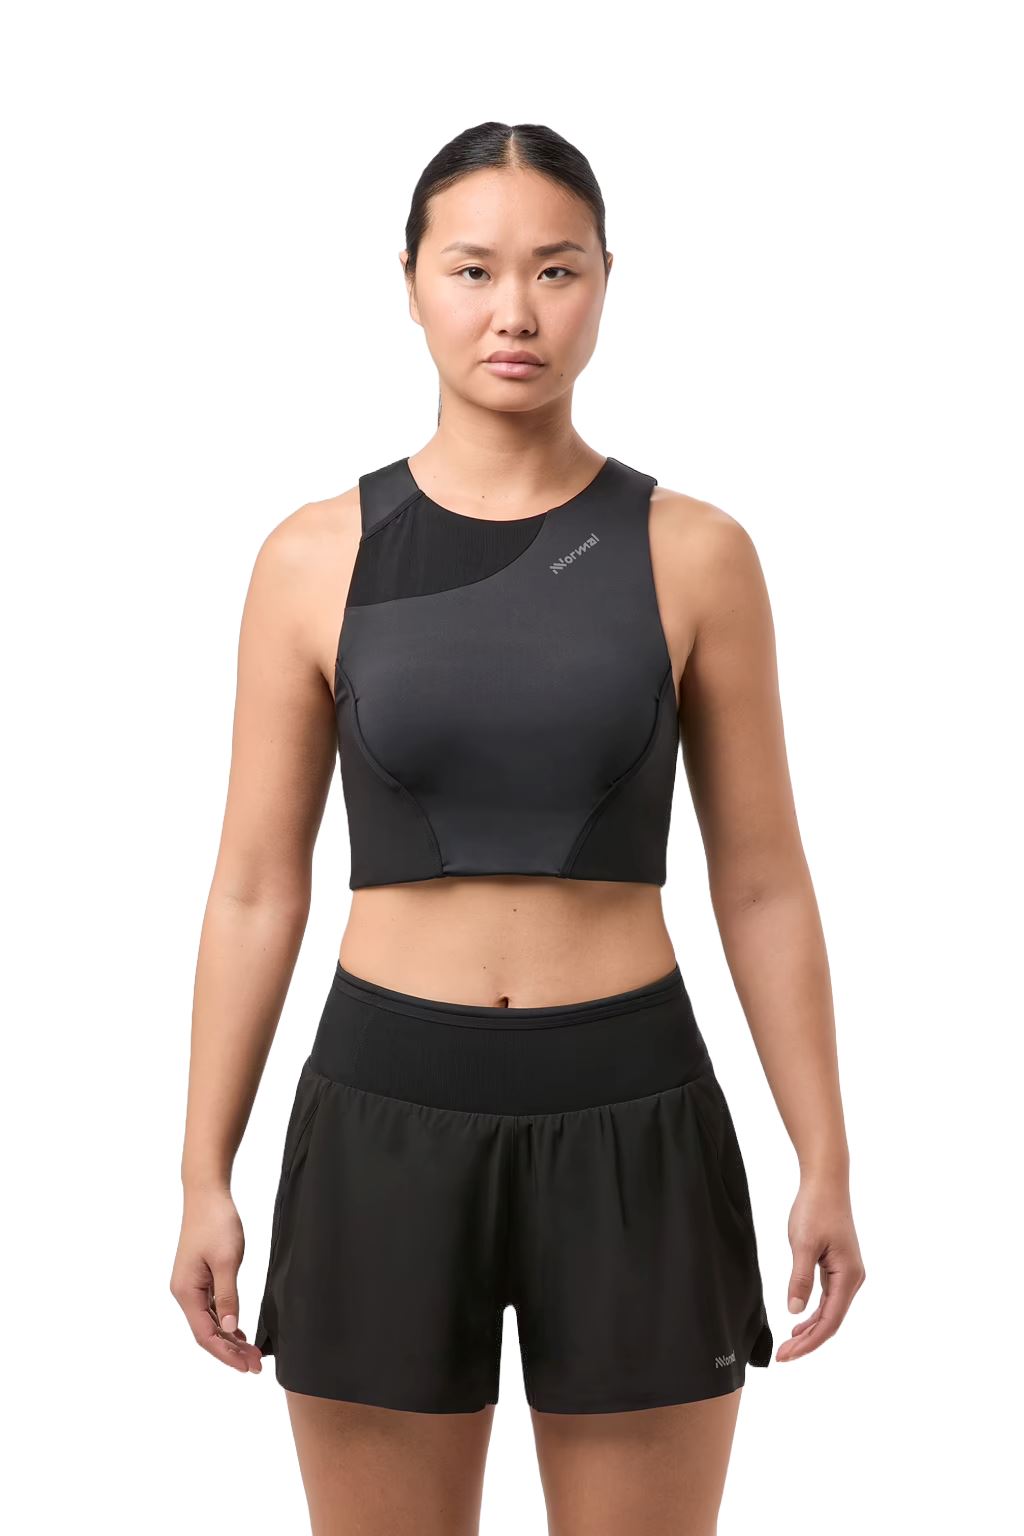 NNormal Trail Cropped Top Women's Black M 